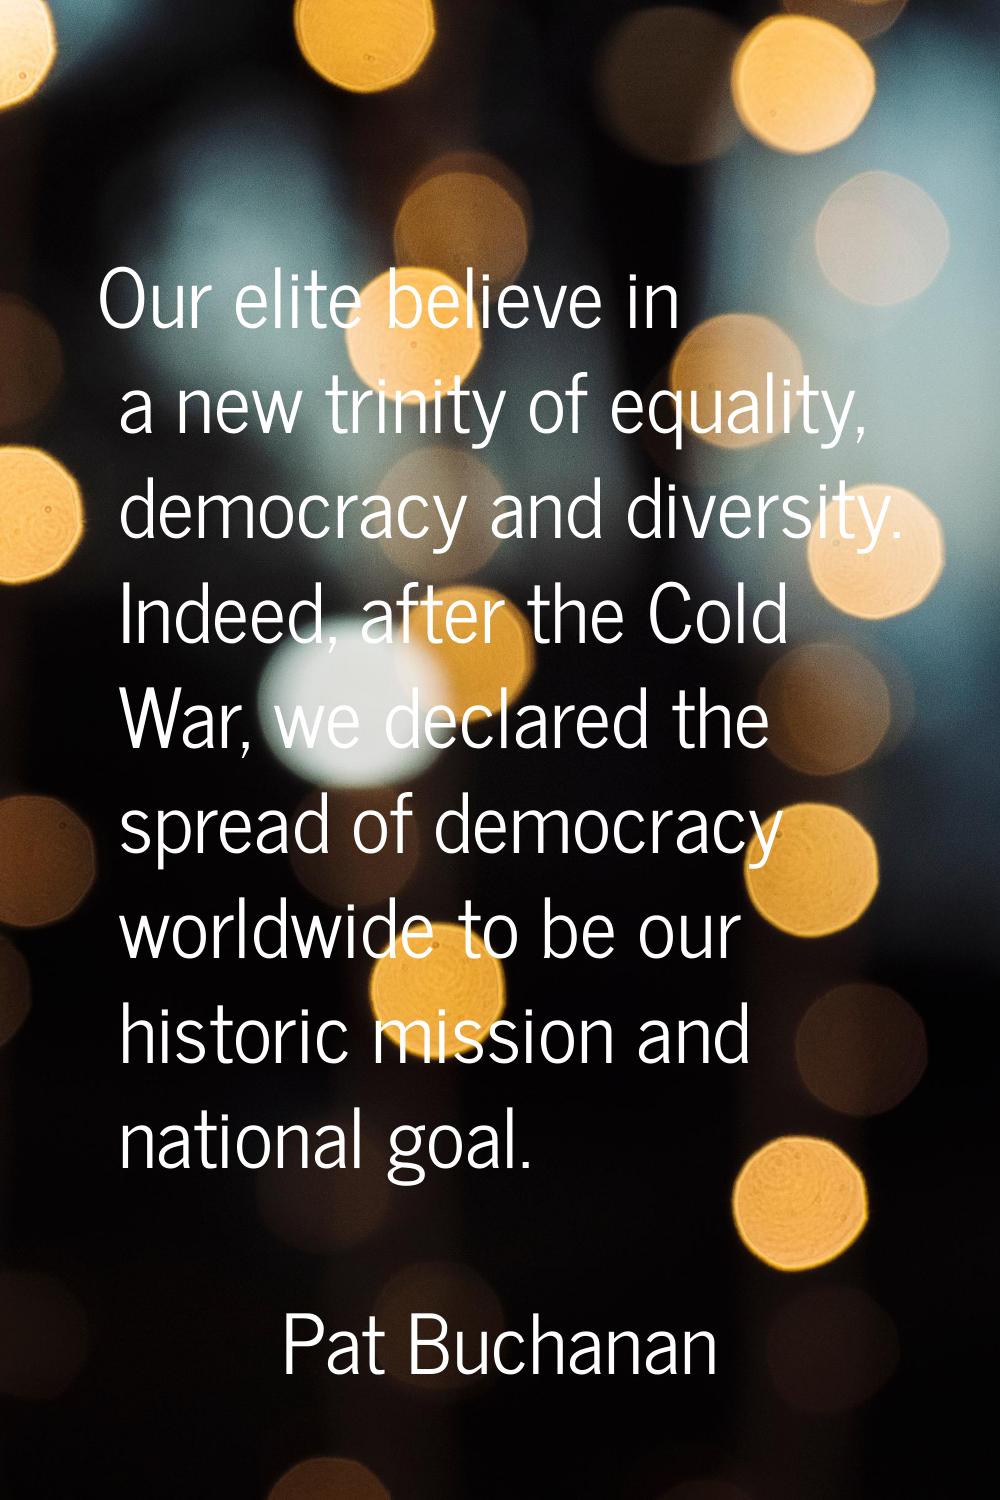 Our elite believe in a new trinity of equality, democracy and diversity. Indeed, after the Cold War